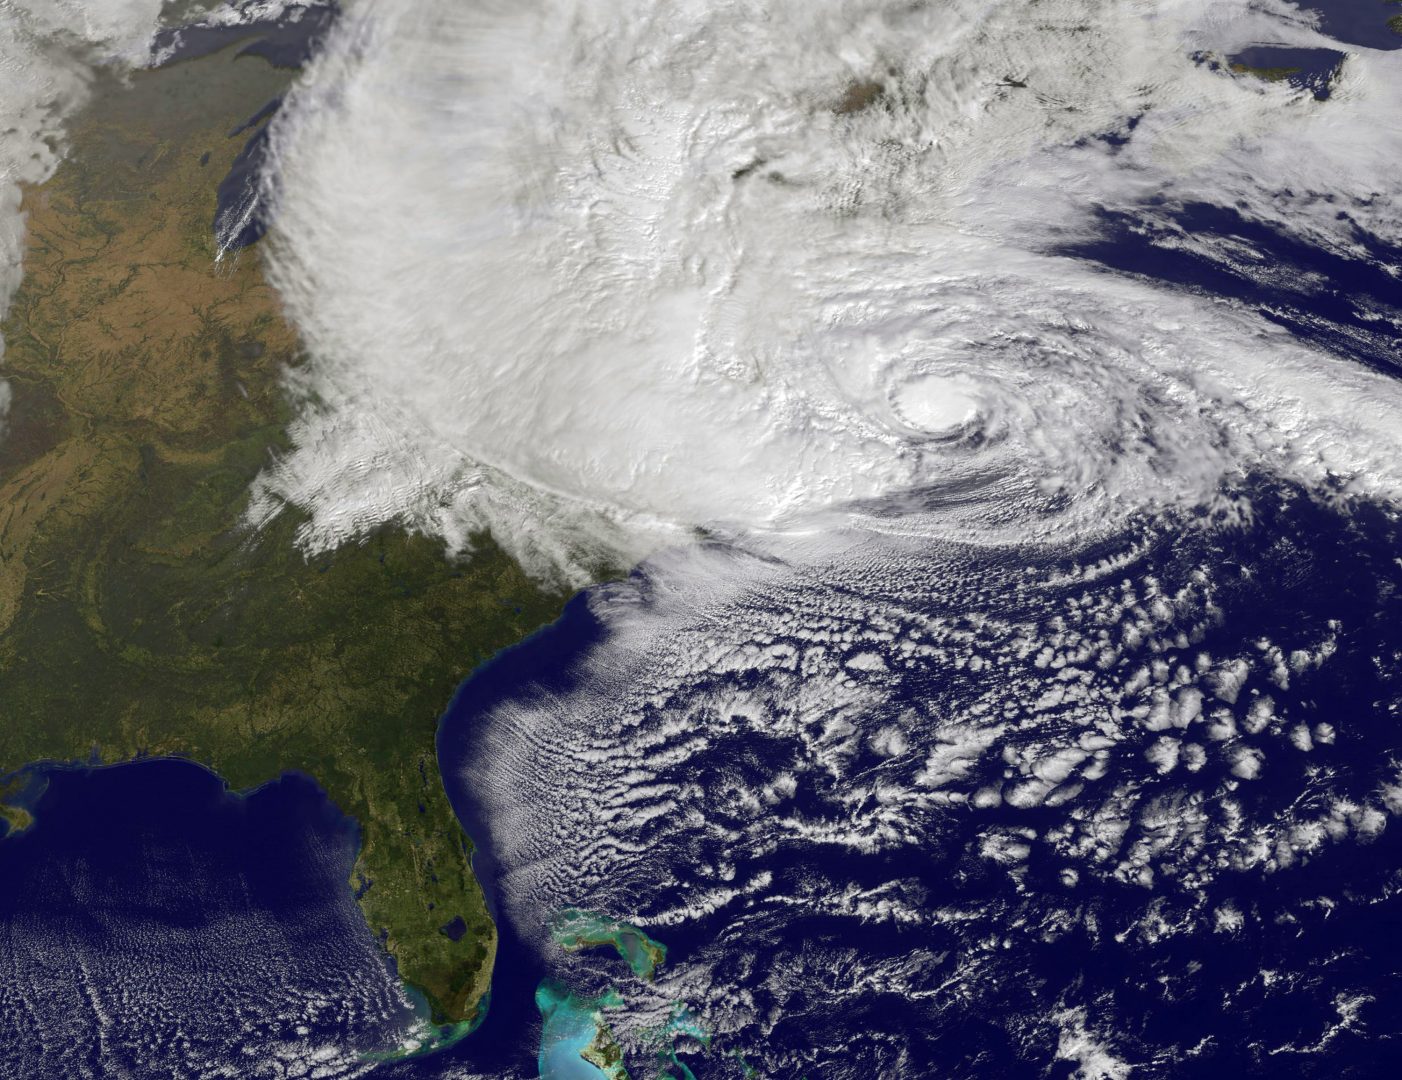 Scientists have been studying the link between climate change and extreme weather events such as Hurricane Sandy, shown here in a NASA image, which left more than 1.3 million Pennsylvanians in the dark in 2012.